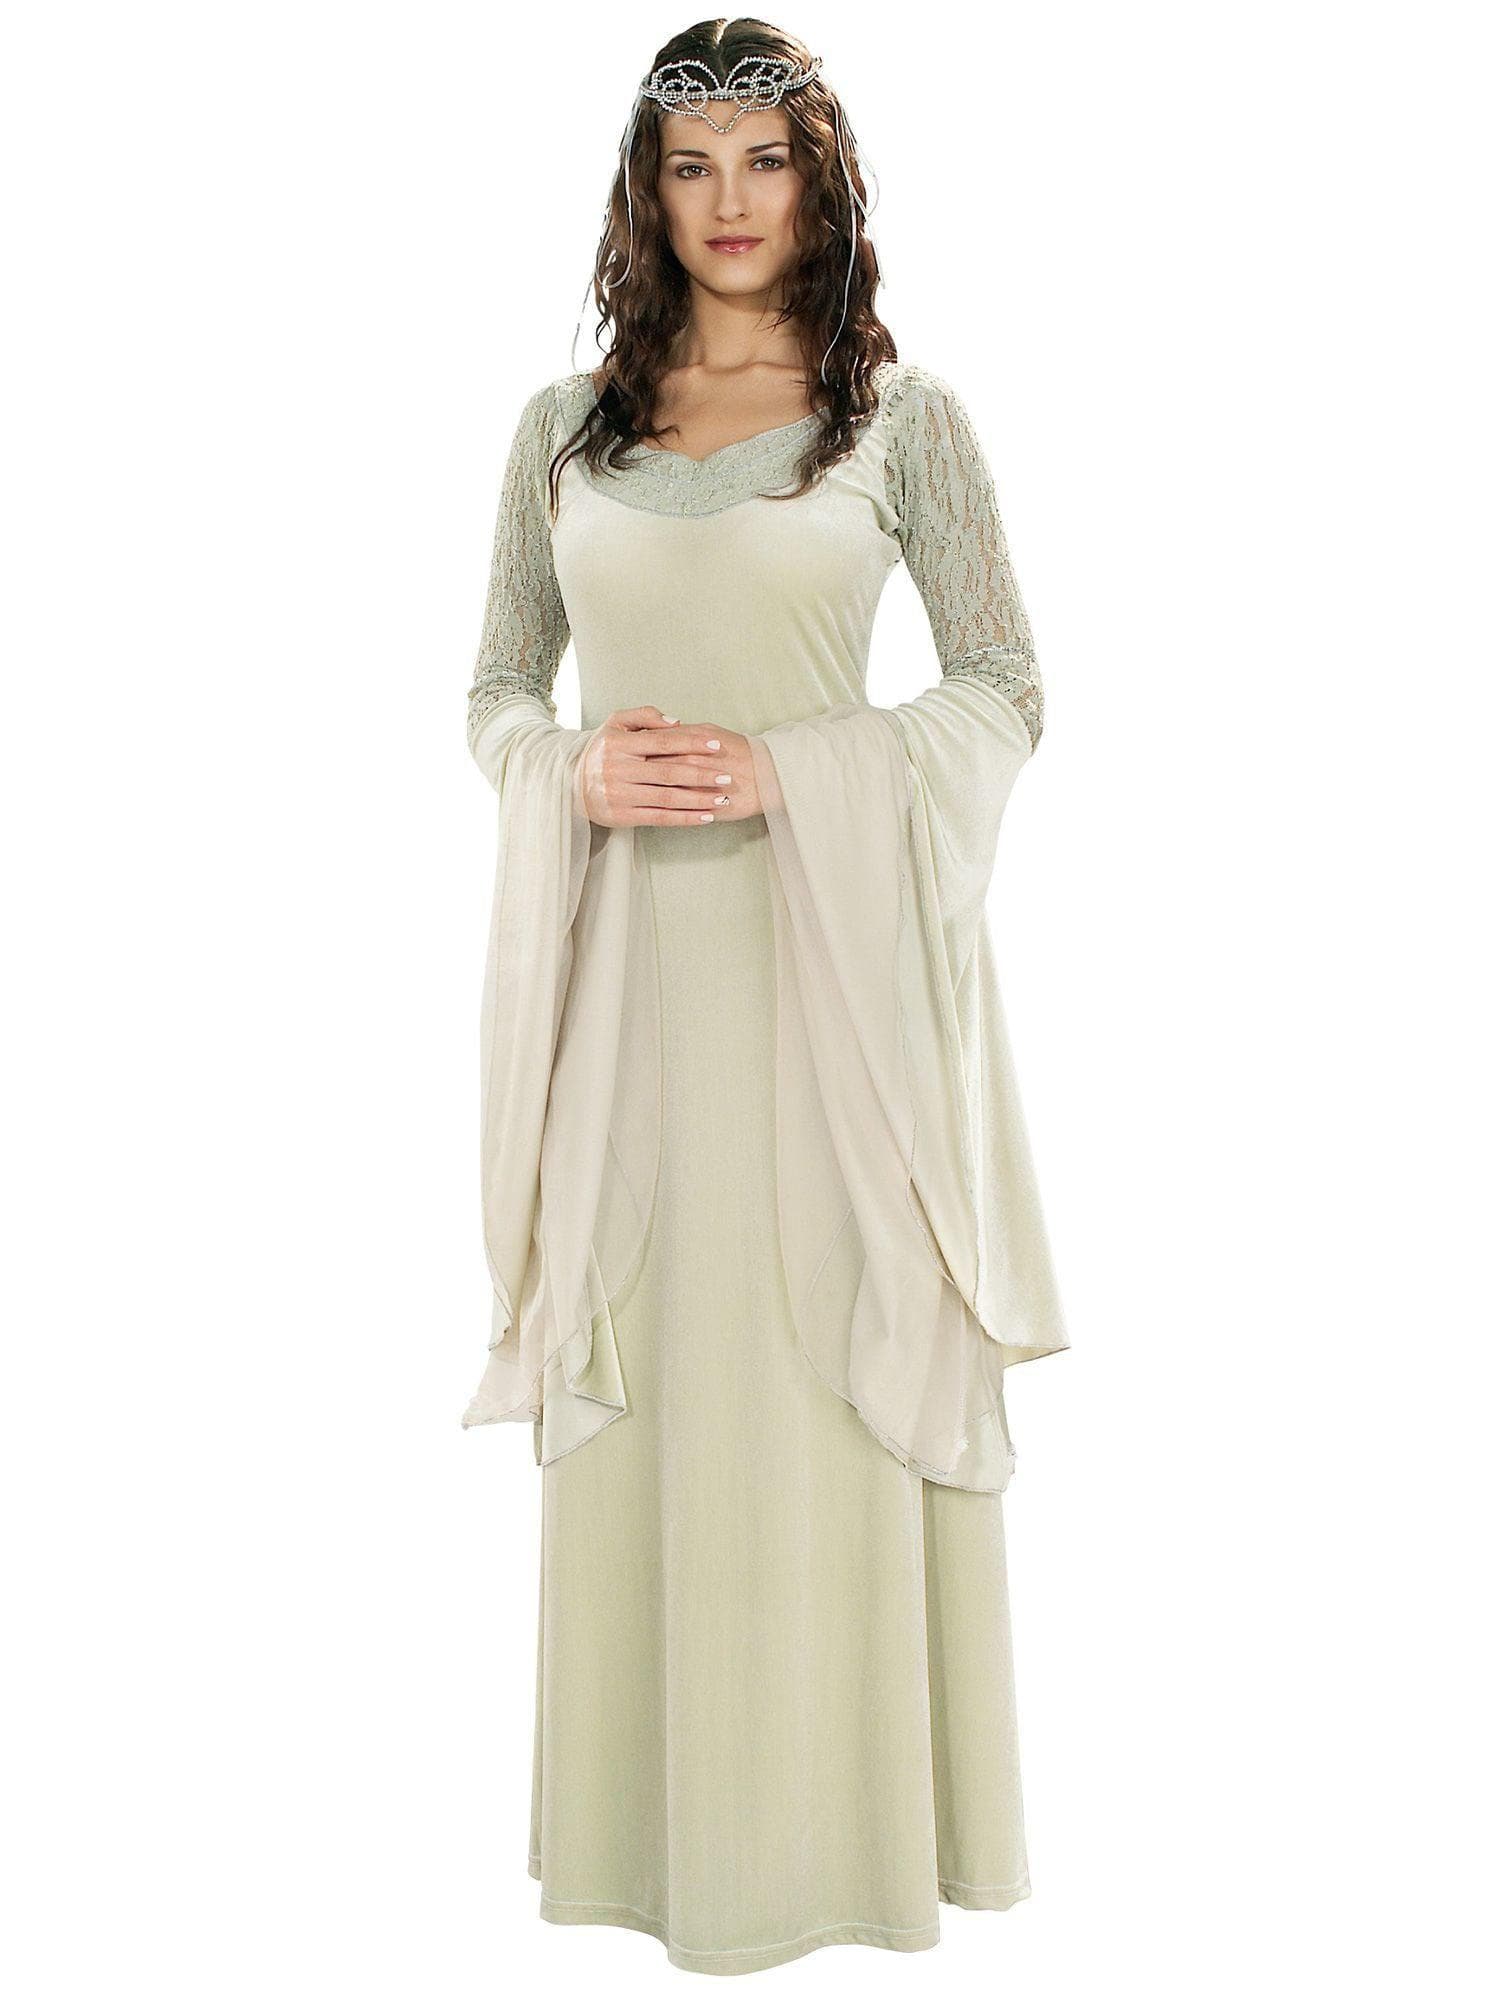 Adult The Hobbit/Lord Of The Rings Queen Arwen Deluxe Costume - costumes.com